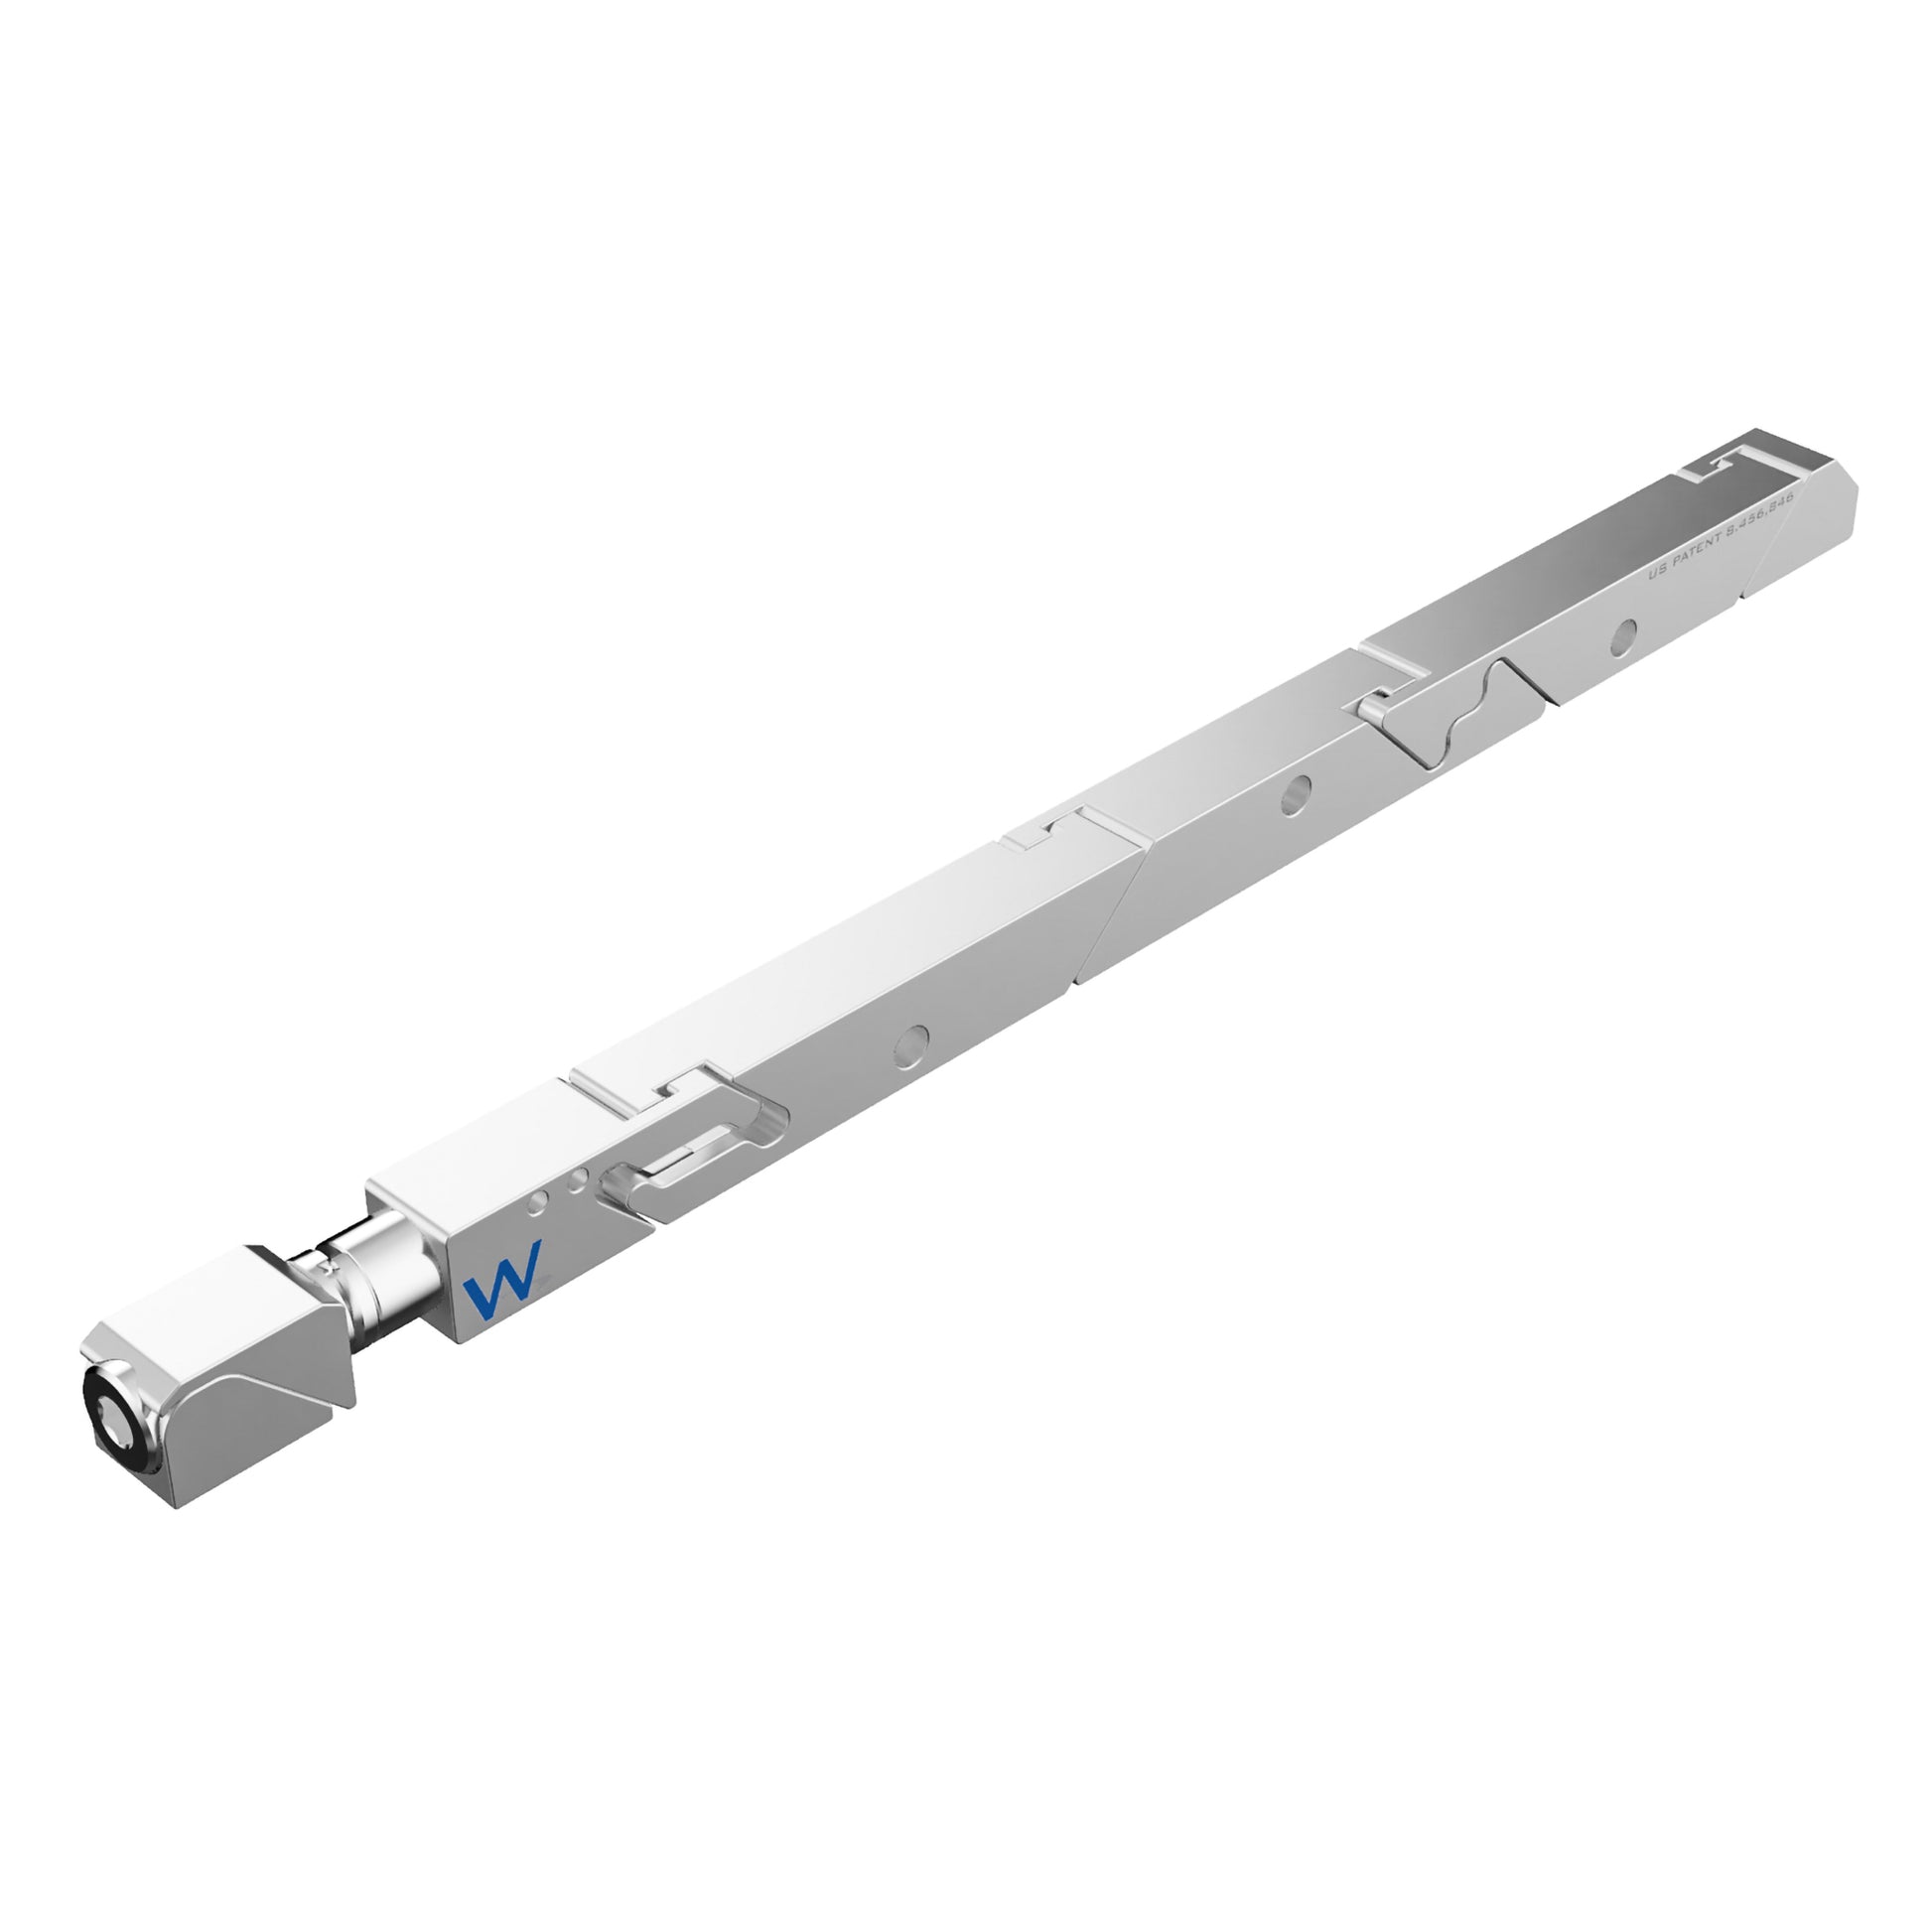 SW7-475-270-250 High Force Wedgelock, segmented long rectulangular hardware component, Clear Chemical Film Finish